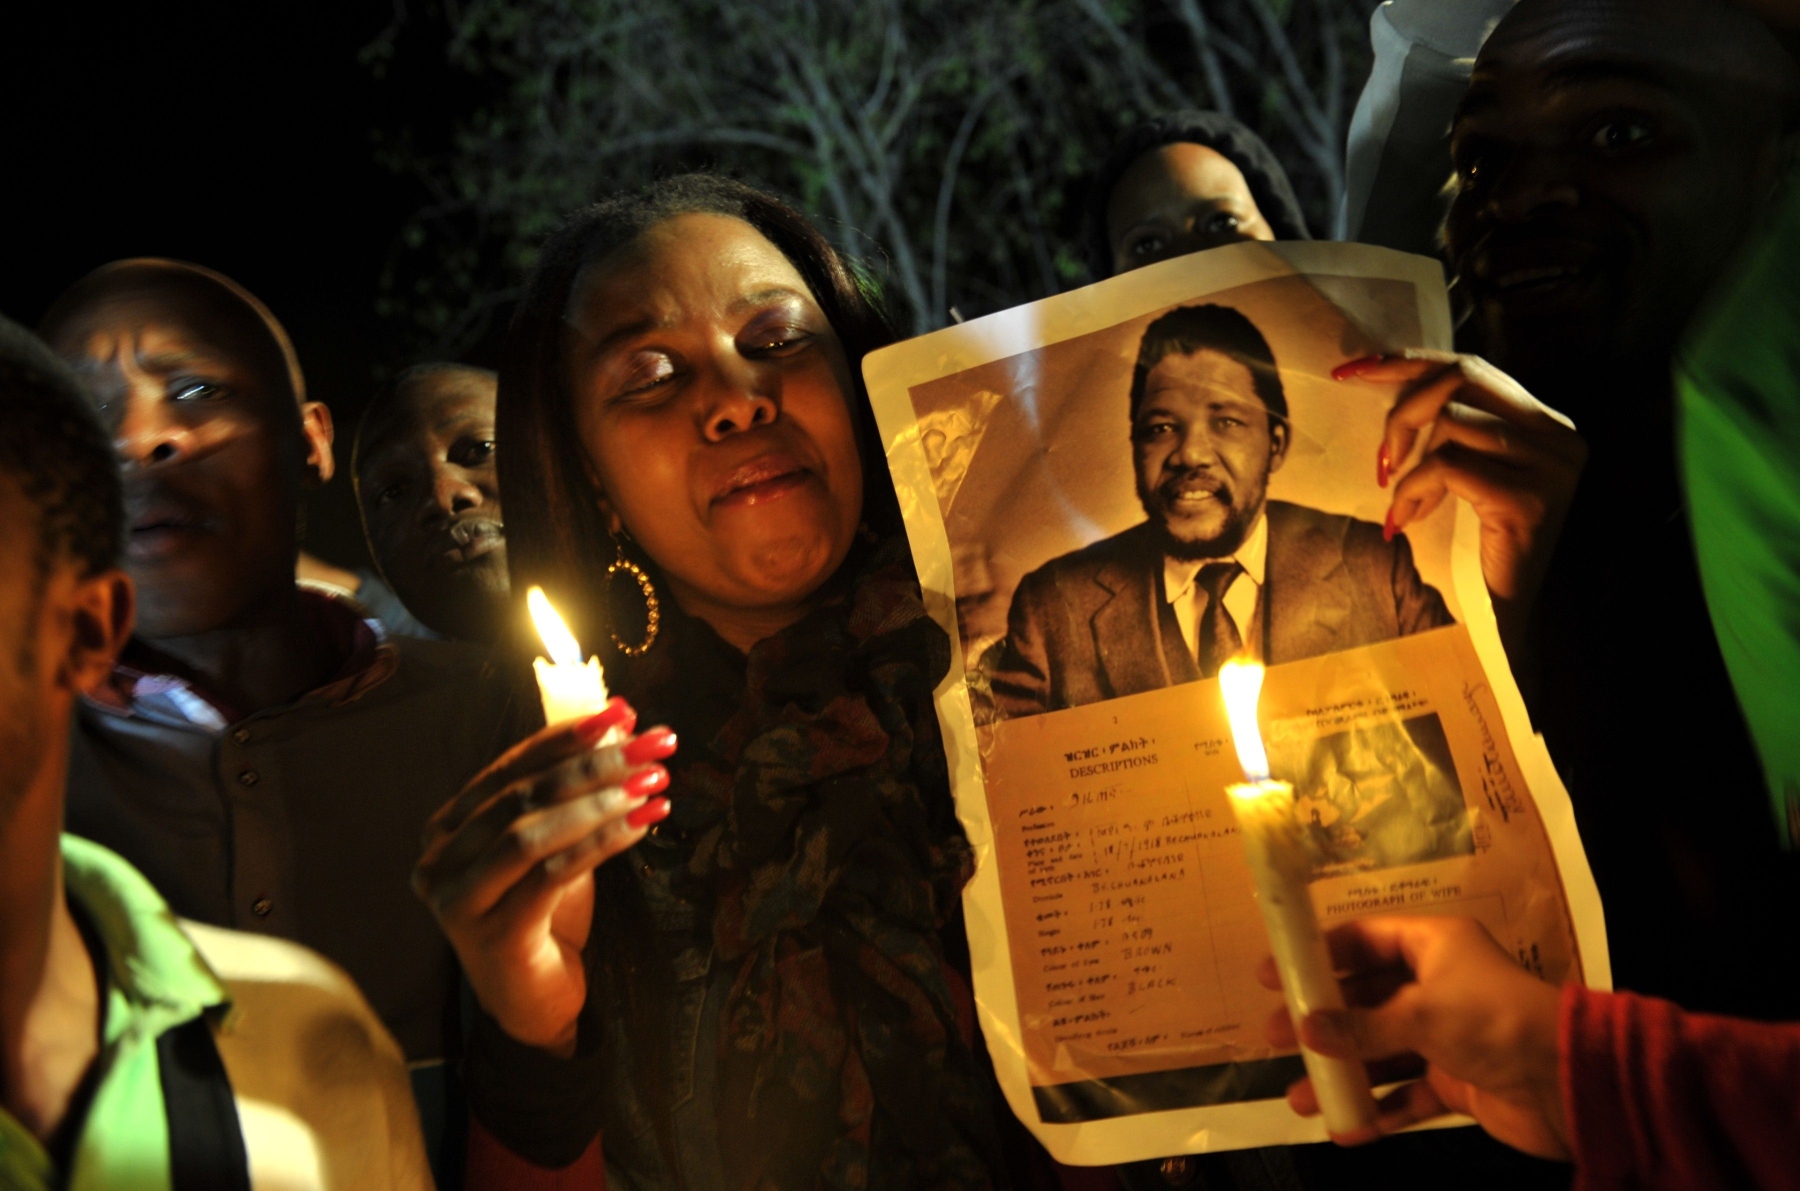 A group of well-wishers hold candles and a photo of Nelson Mandela as they pray for his recovery outside the Mediclinic heart hospital where he is hospitalised in Pretoria. Photo: AFP